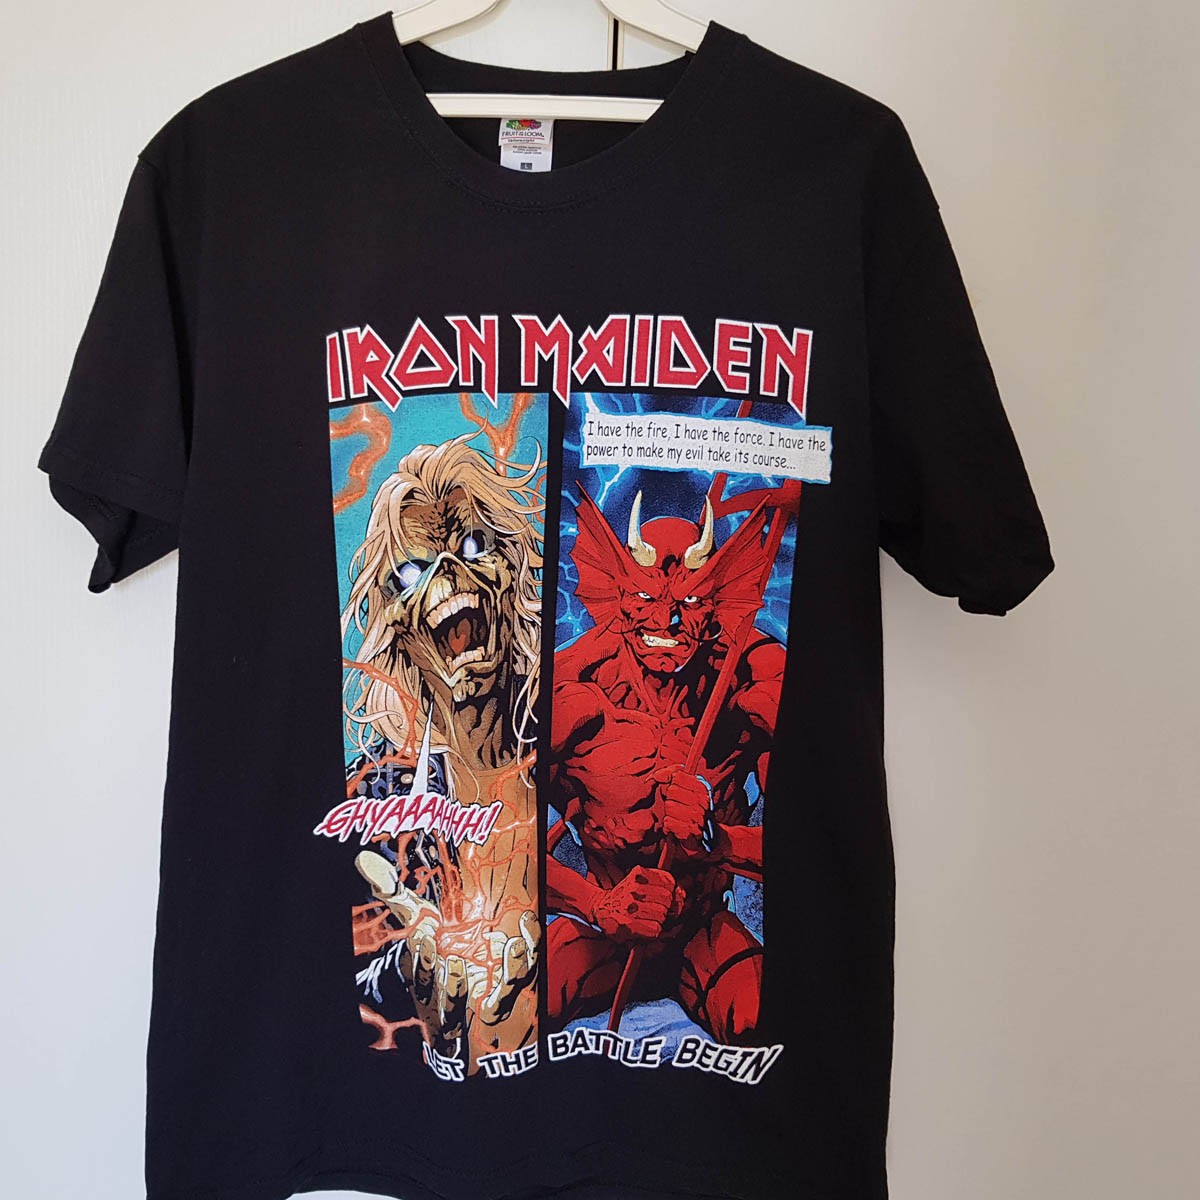 Iron Maiden - 2018 Legacy of the Beast Tour Tshirt - Iron Maiden Collector